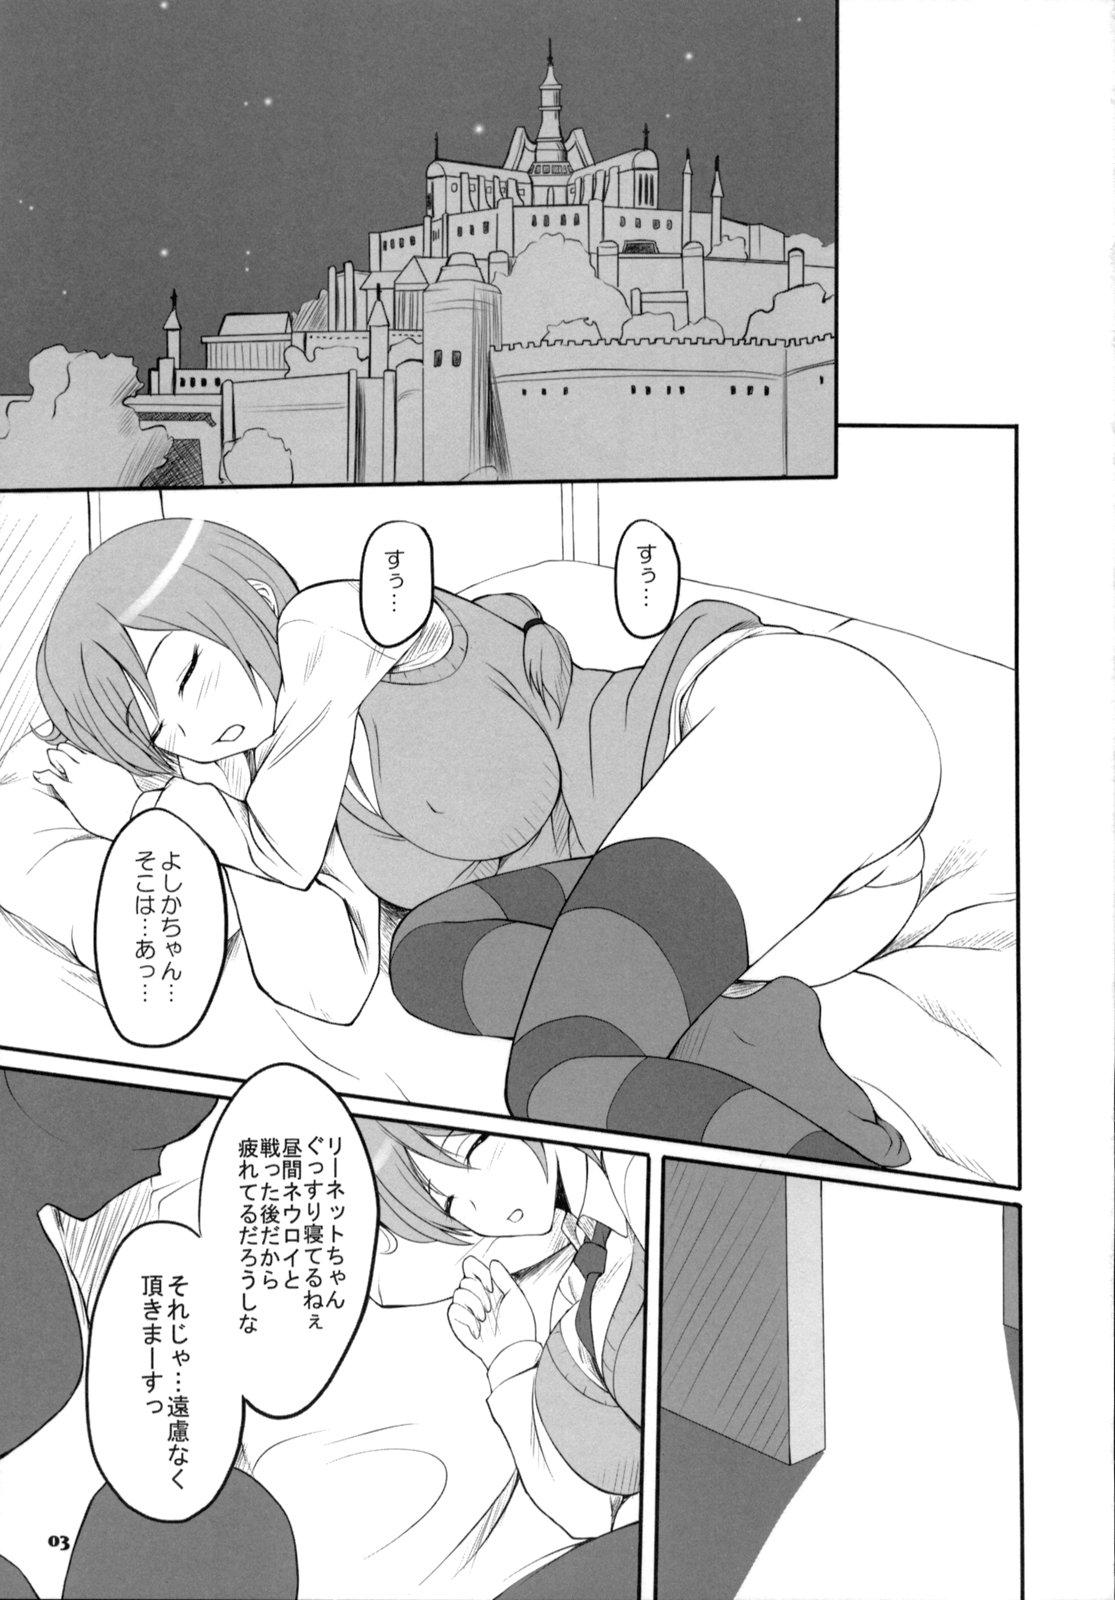 Bed Oppantsu Strike - Strike witches Amateur Porn - Page 3